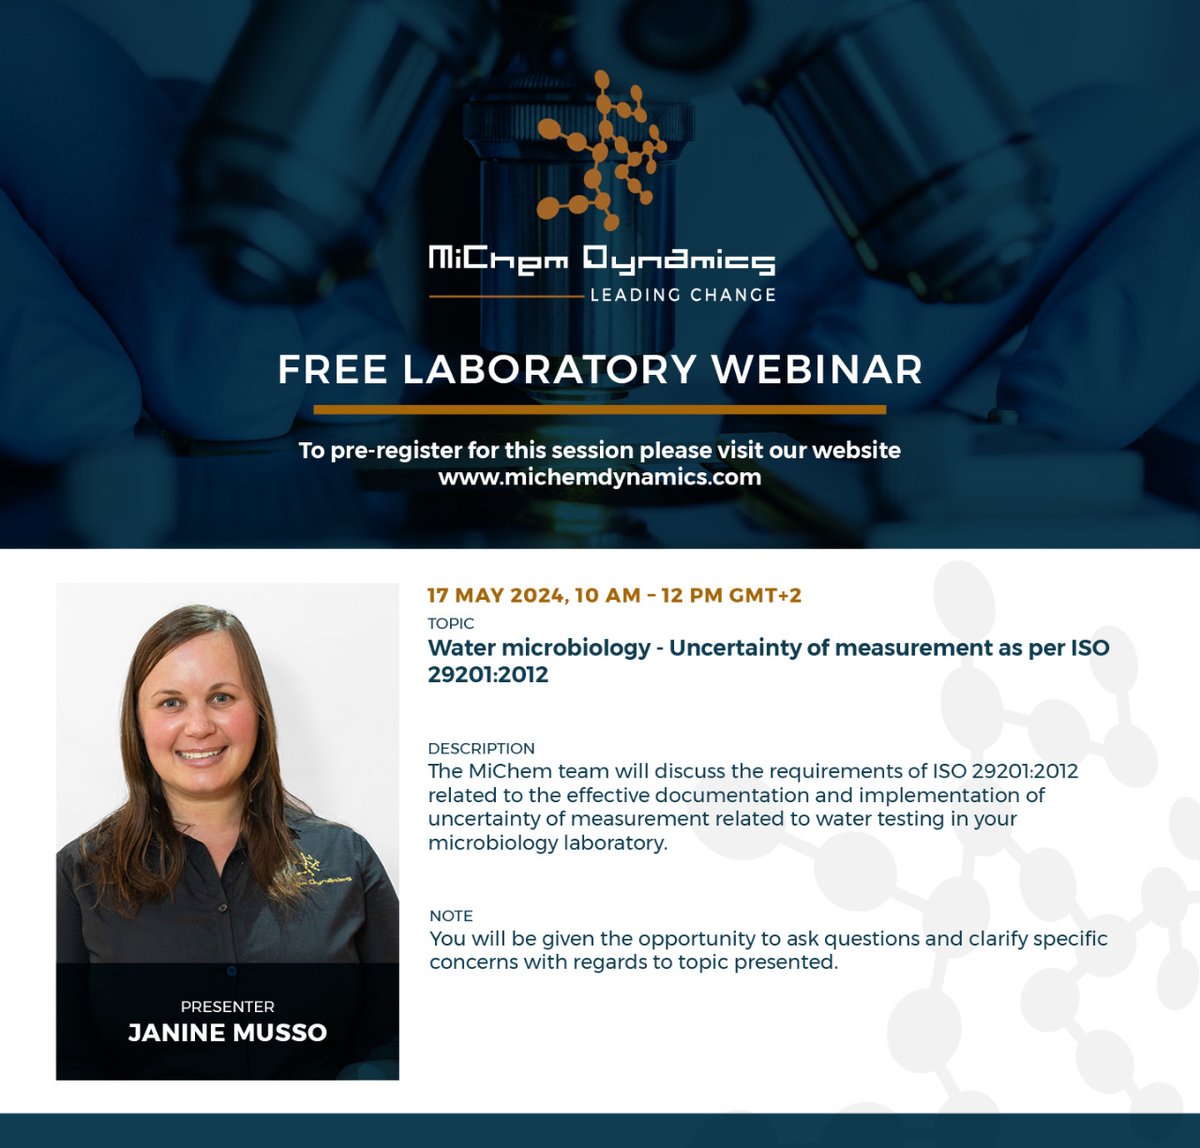 OUR FREE LABORATORY WEBINAR SERIES FOR 2024 CONTINUES! Register here: us02web.zoom.us/webinar/regist… Visit website to pre-register for our free lab webinars:  Testing & Calibration lab (ISO/IEC 17025:2017): michemdynamics.com/scientific-ser…  Medical lab (ISO 15189:2022): michemdynamics.com/scientific-ser…